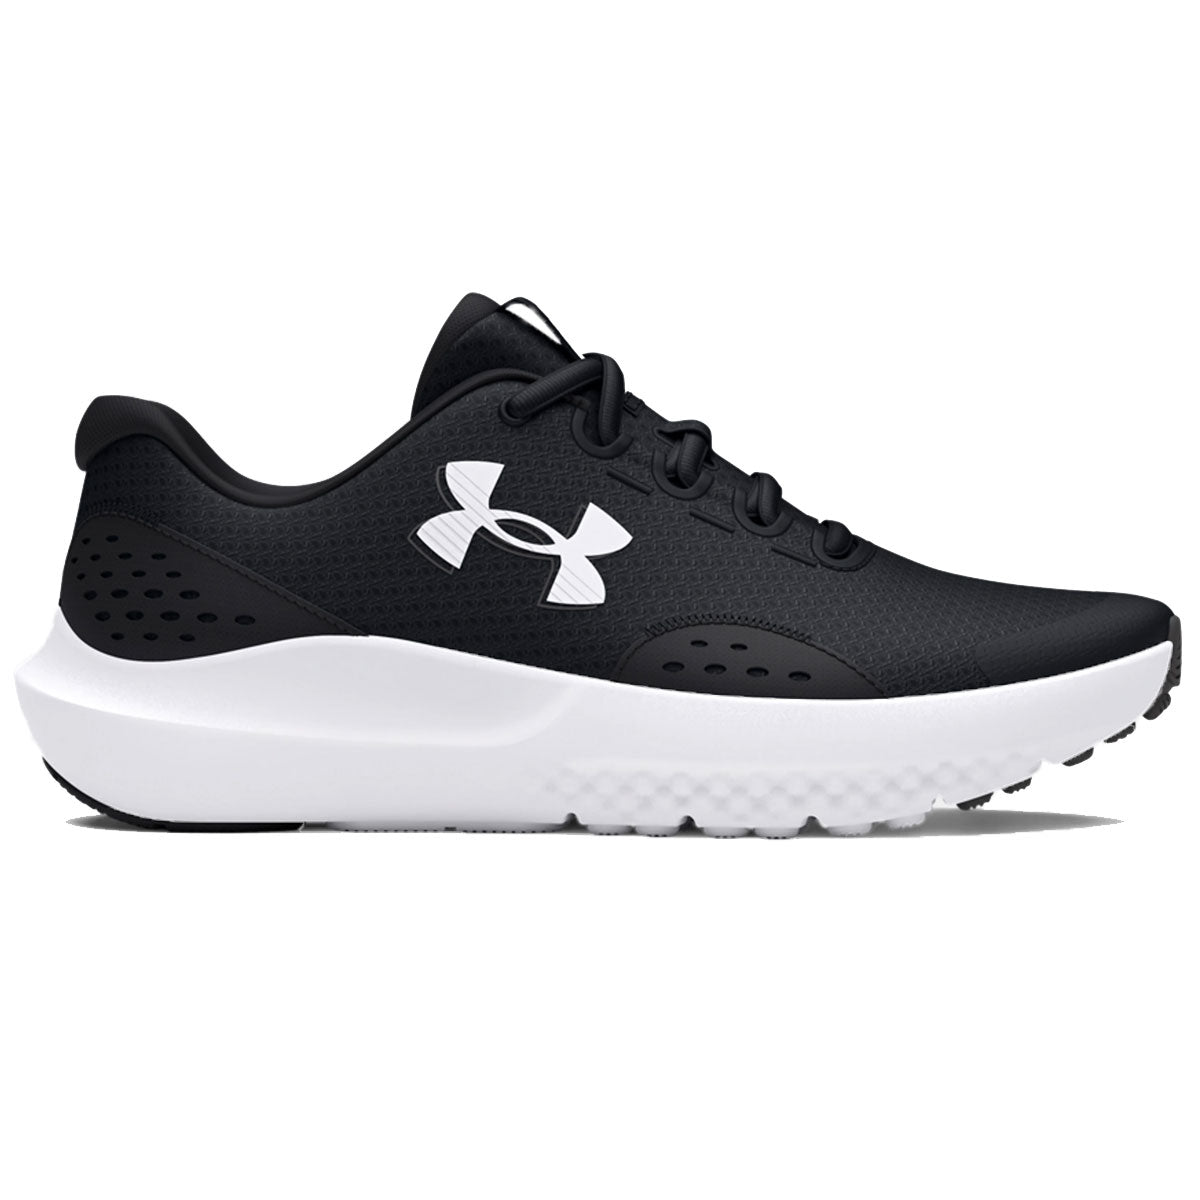 Under Armour BGS Surge 4 Running Shoes - Boys - Black/Anthracite/White